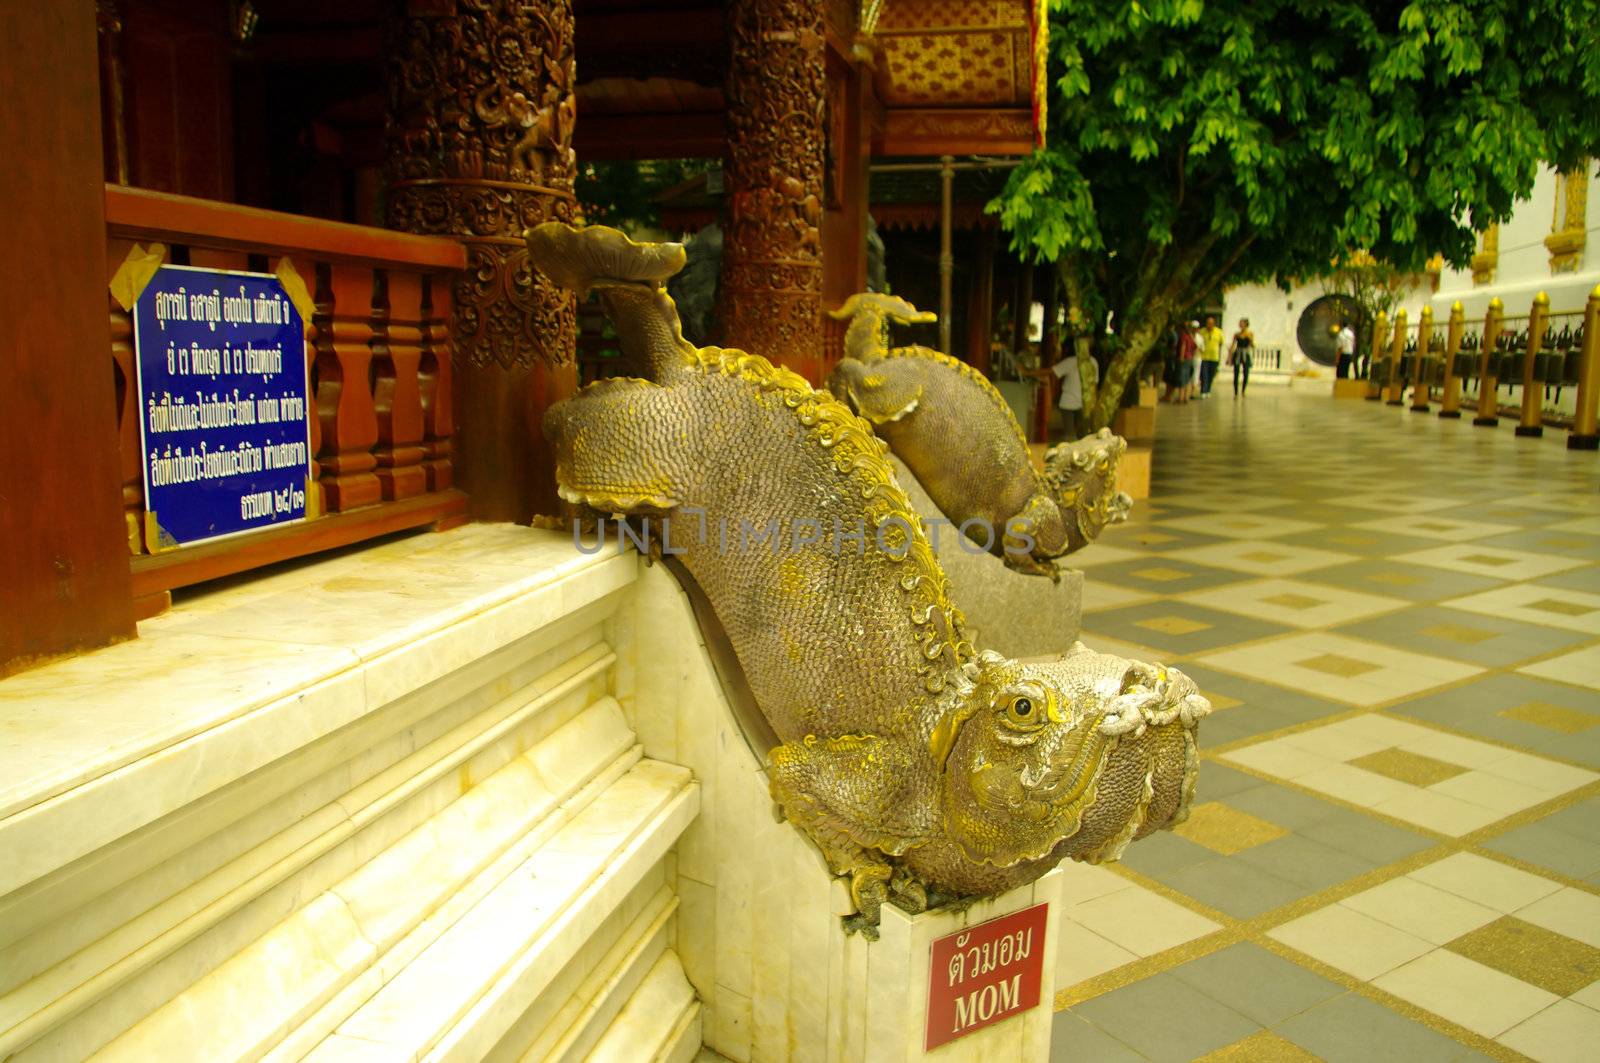 Lizards at the entrance kiosk. Buddhism has many symbolic and mythical animals. Lizard, dragon, tortoise, phoenix are among the most common.